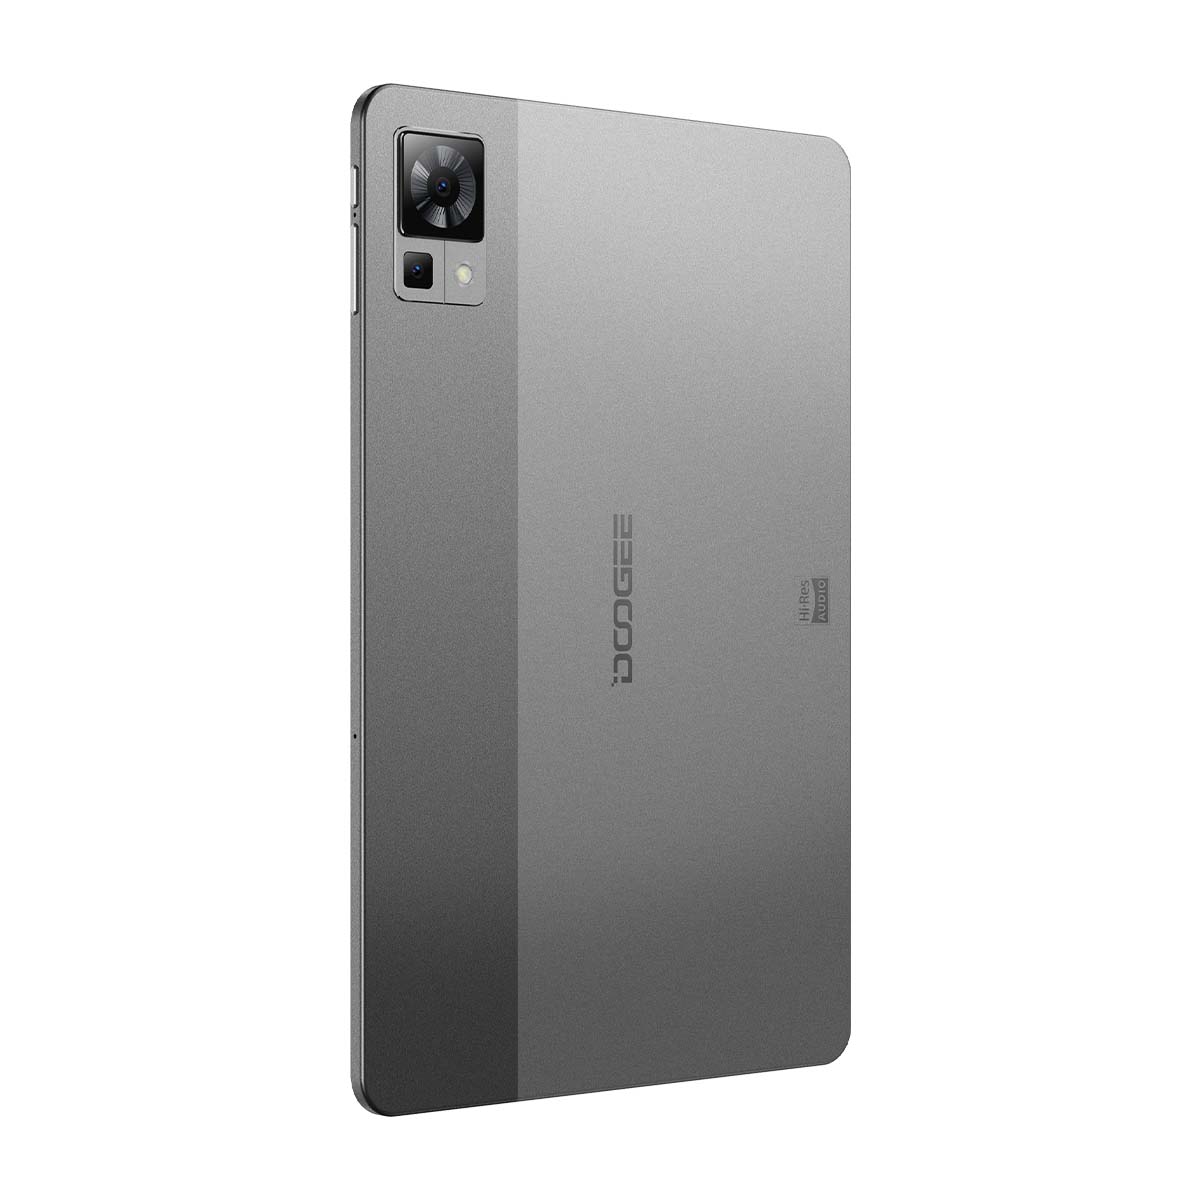 Doogee T30 Pro Screen Protector - Privacy Lite